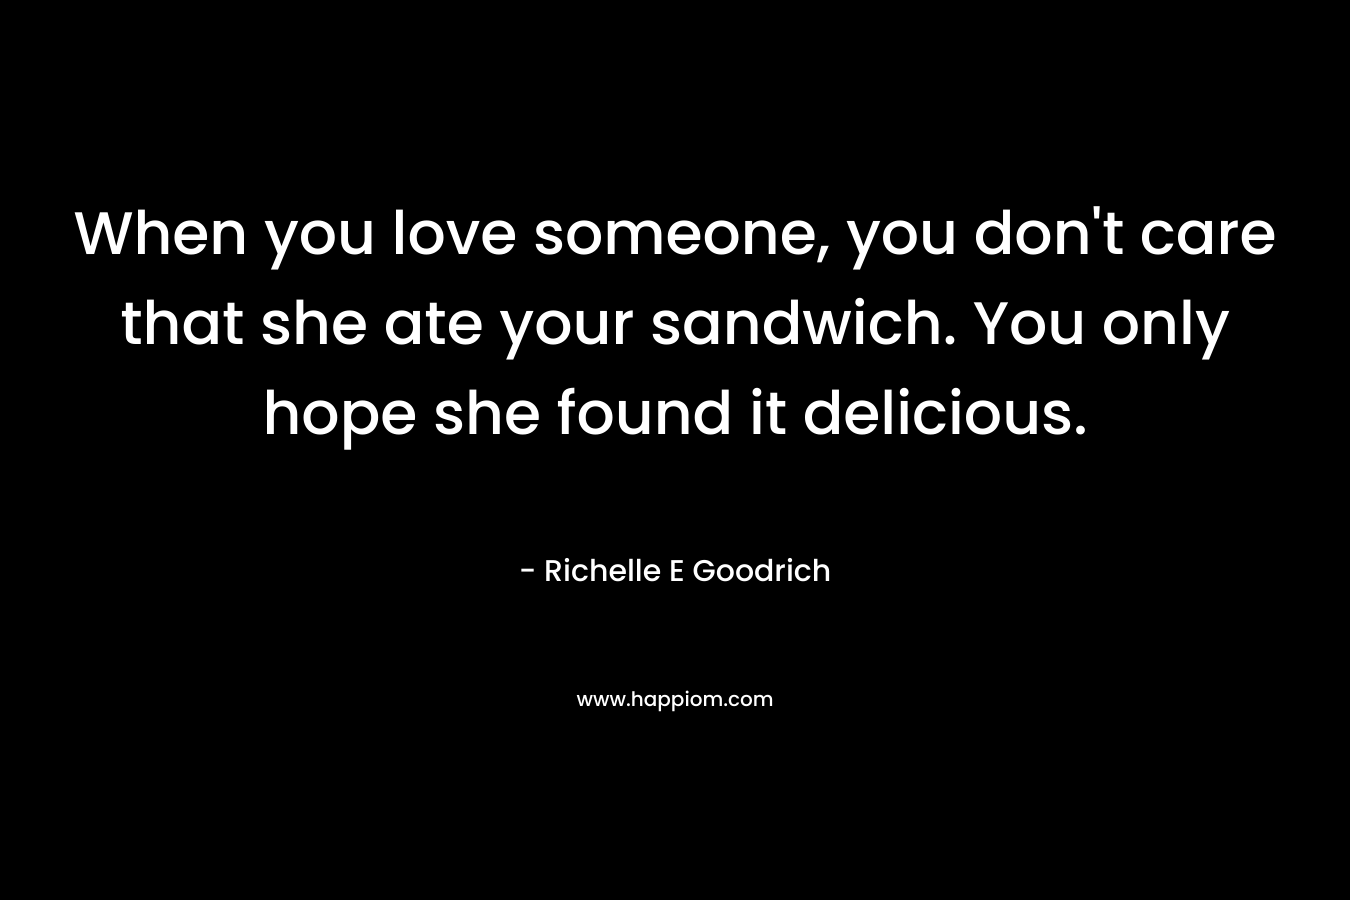 When you love someone, you don't care that she ate your sandwich. You only hope she found it delicious.